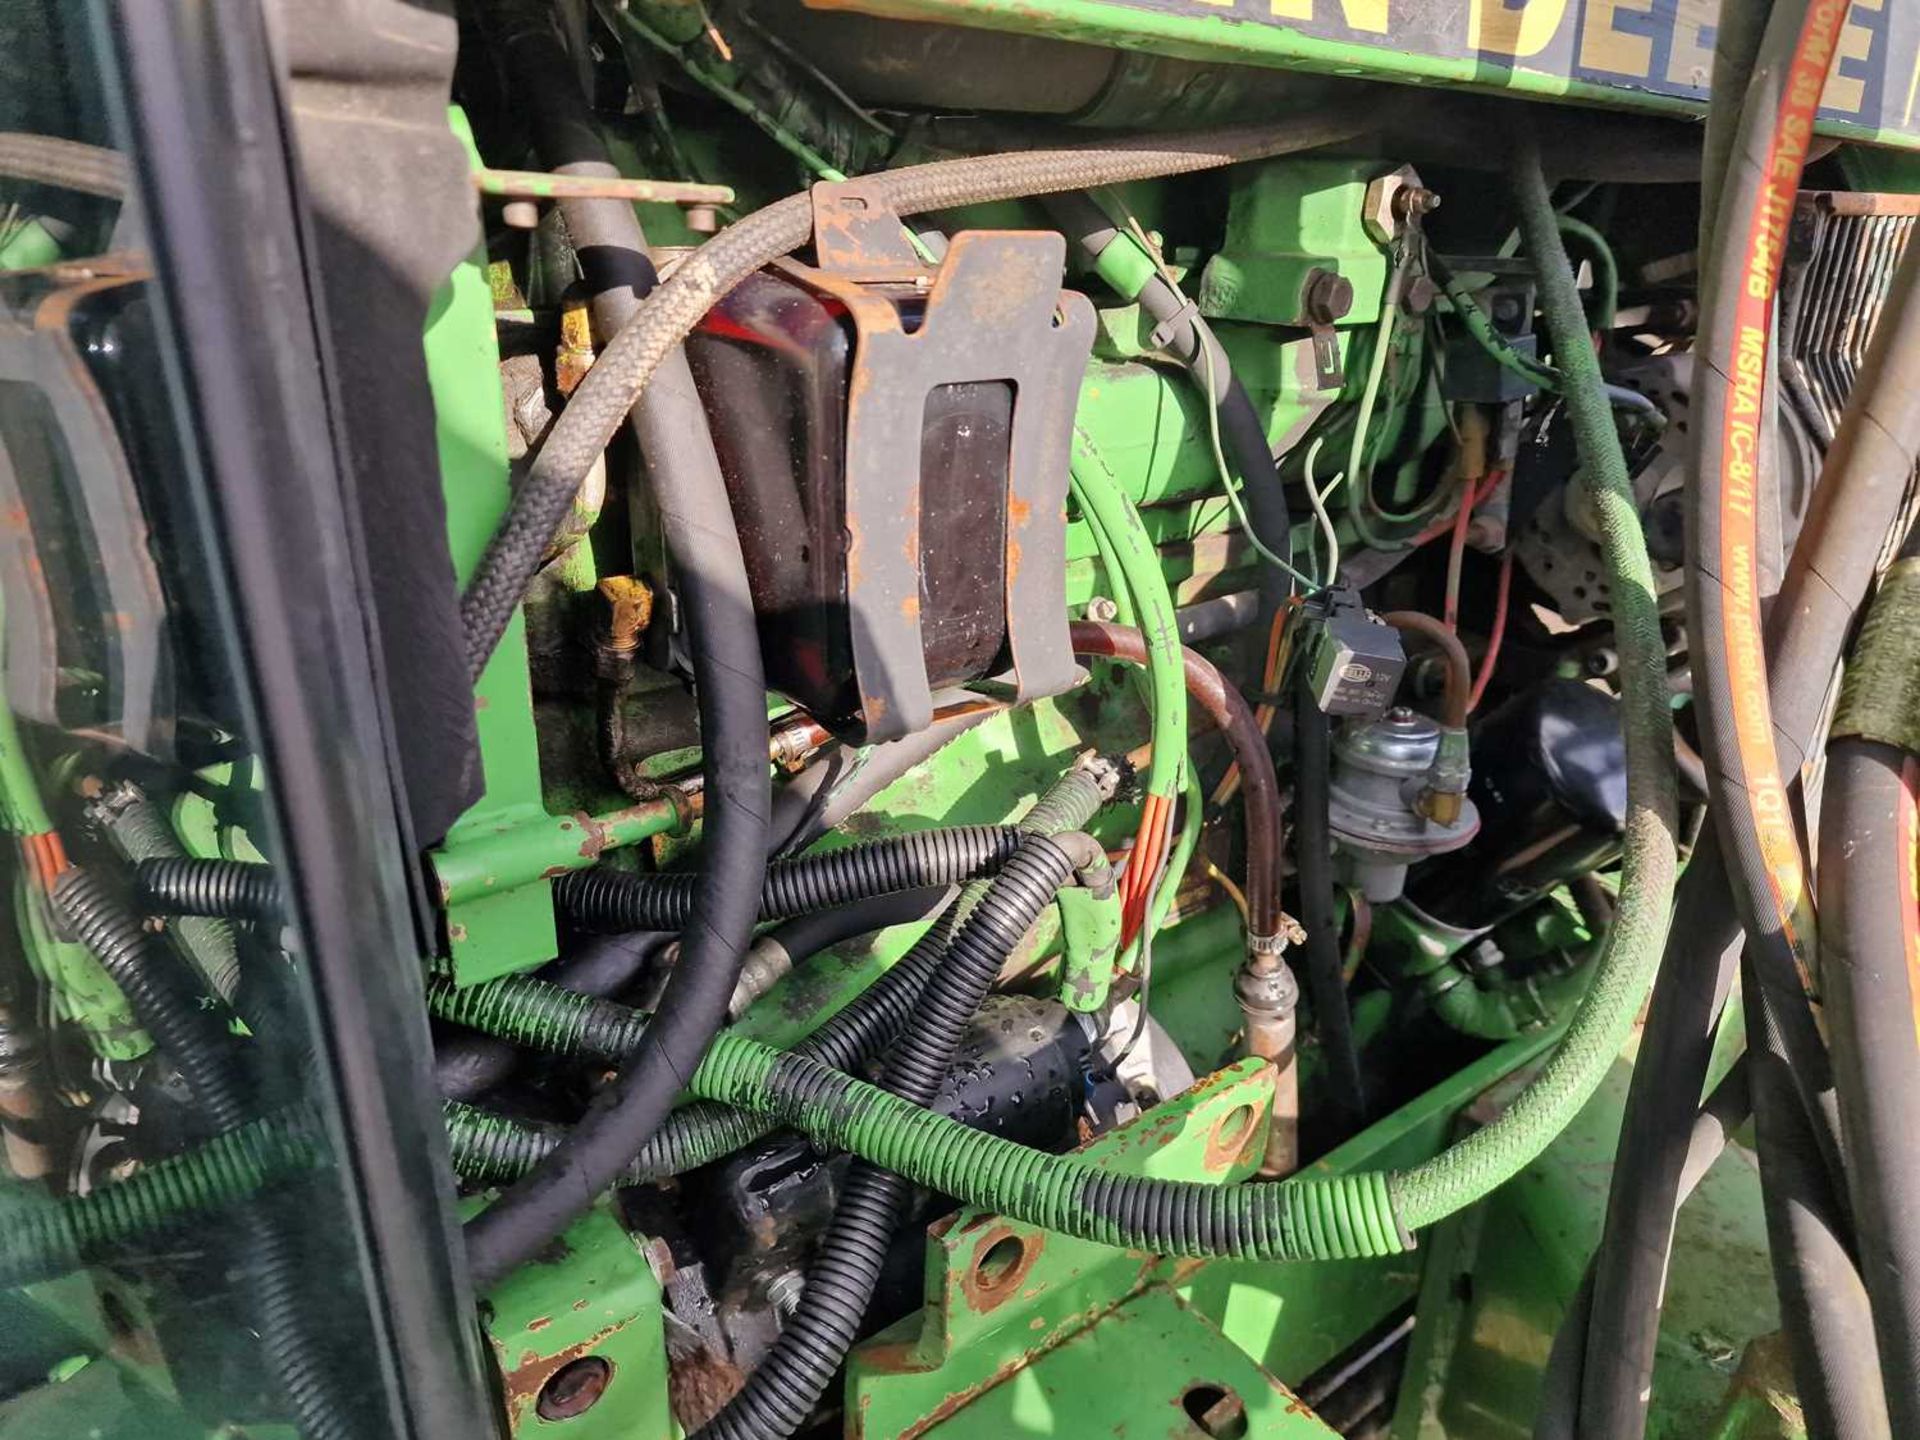 1989 John Deere 2850 4WD Tractor, Loader, 2 Spool Valves, Push Out Hitch (Reg. Docs. Available) - Image 21 of 52